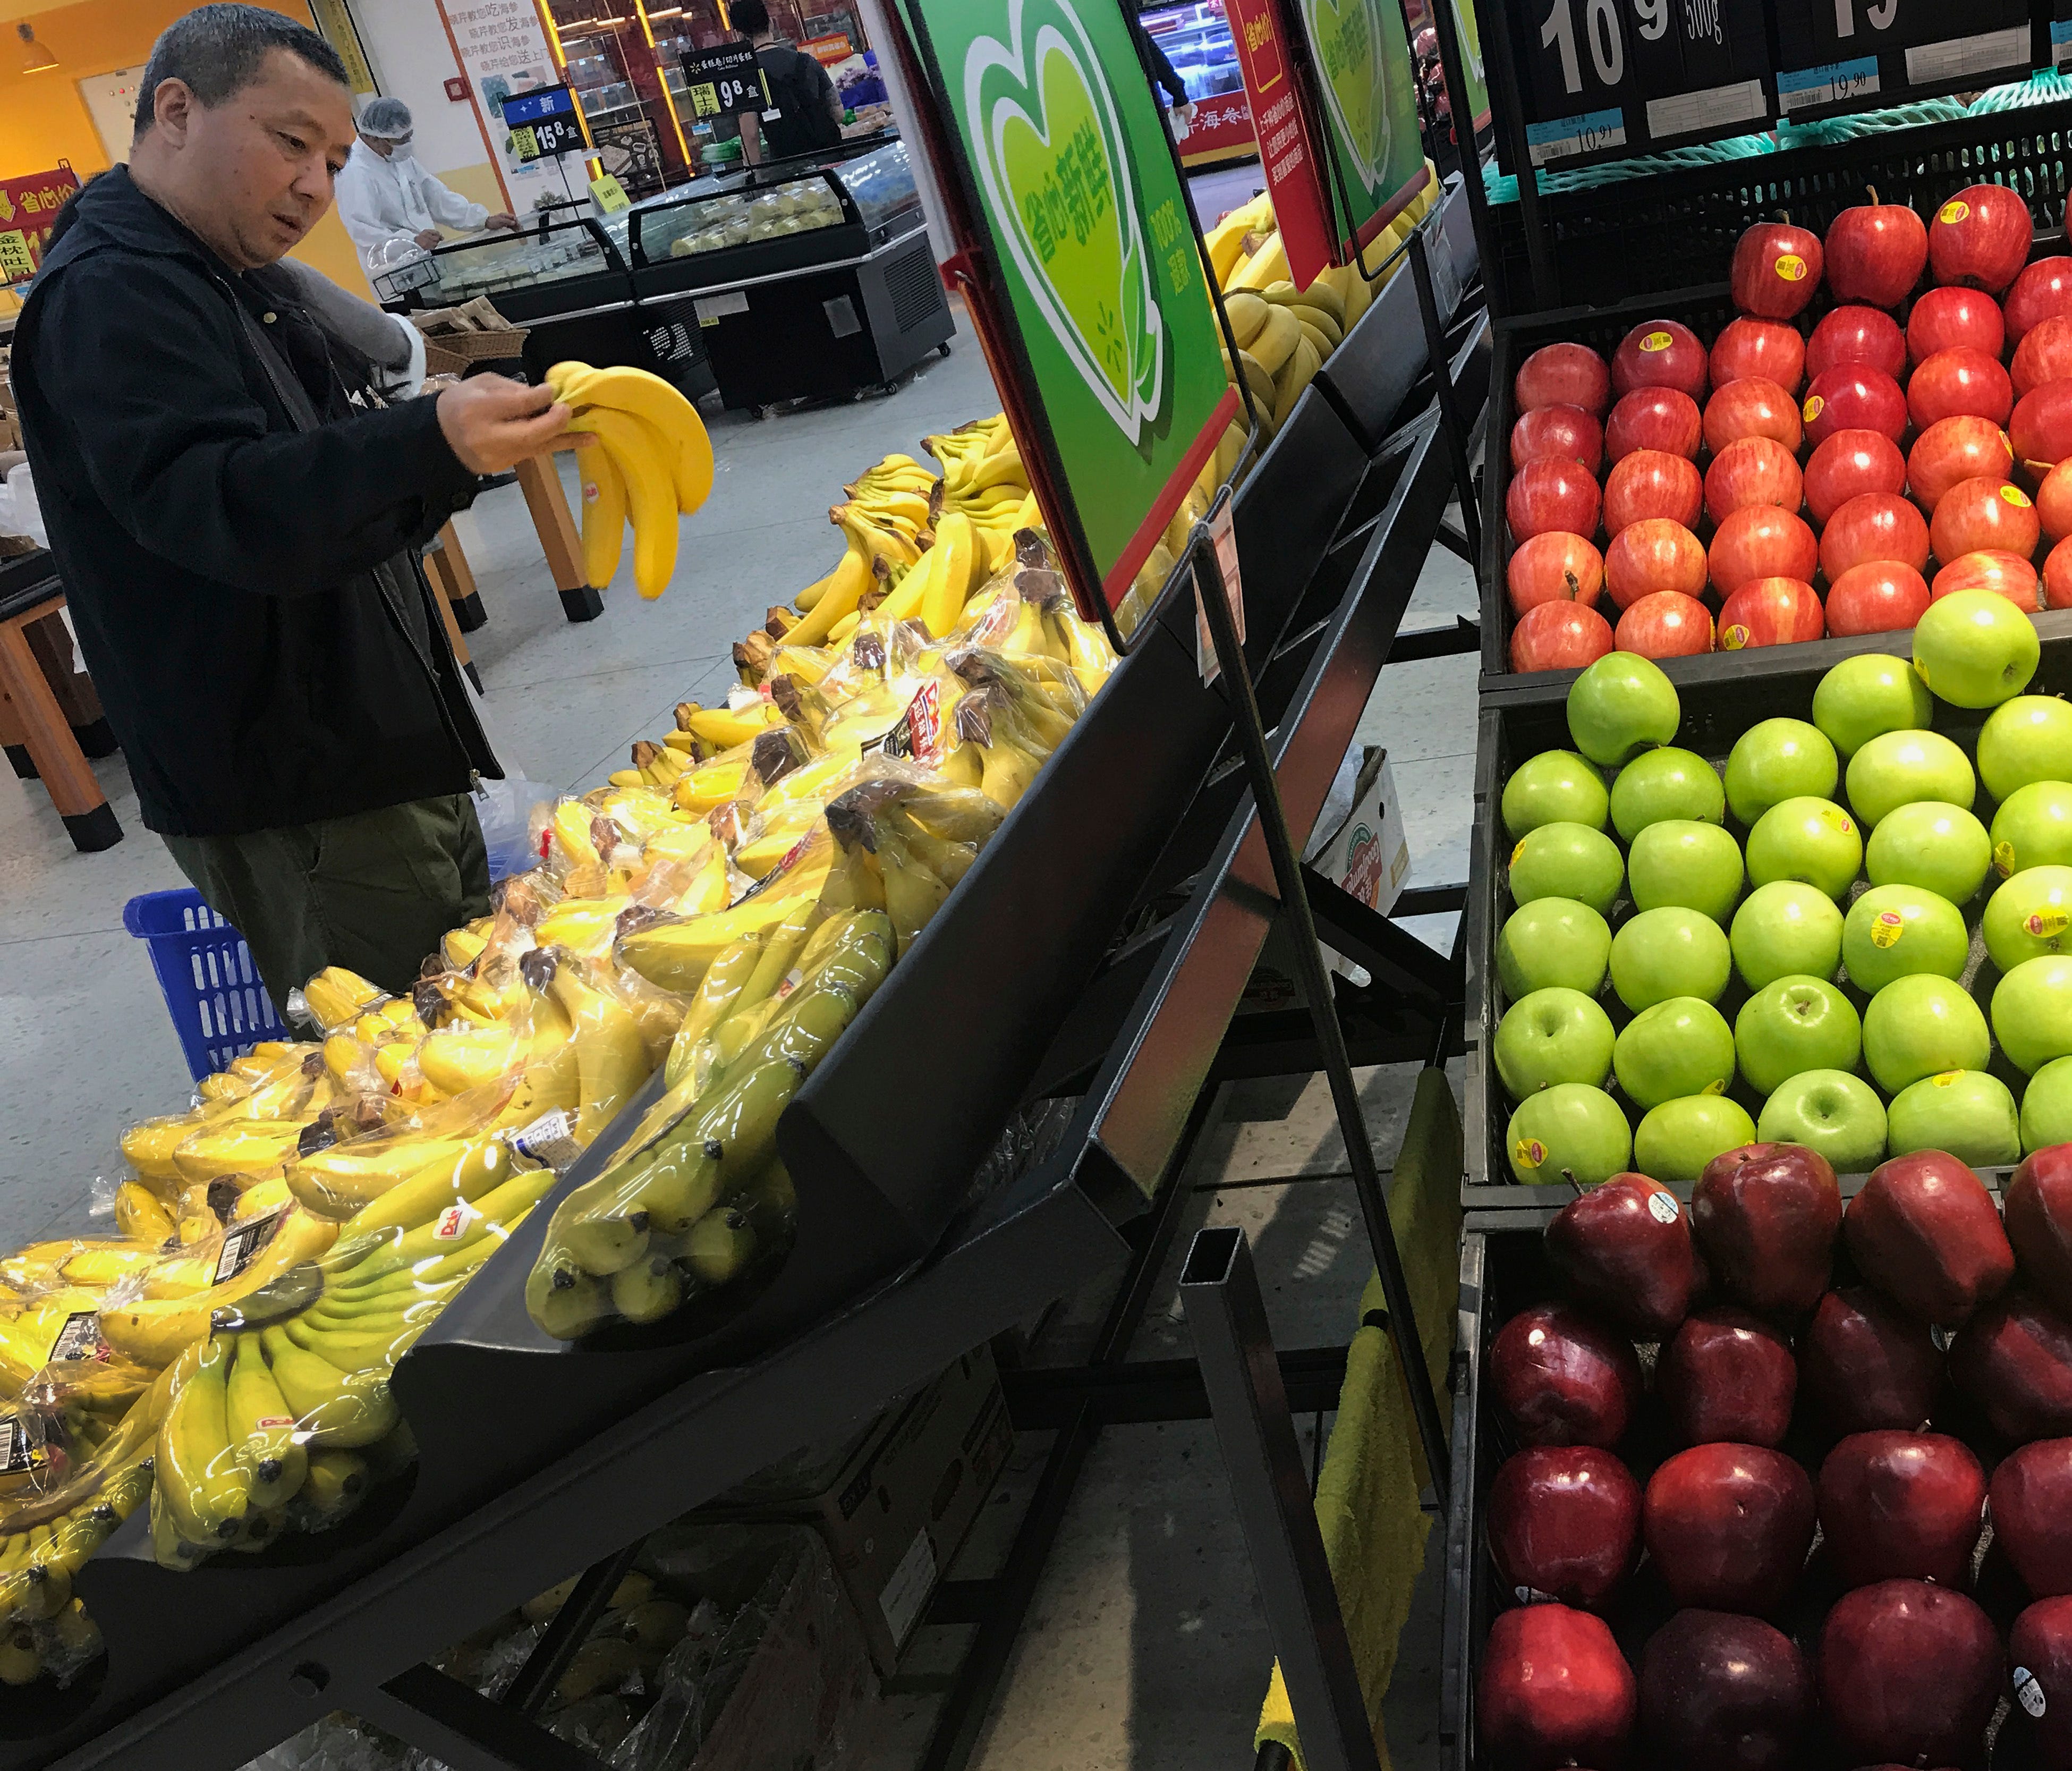 A man chooses bananas near imported apples from the United States at a supermarket in Beijing on Monday.